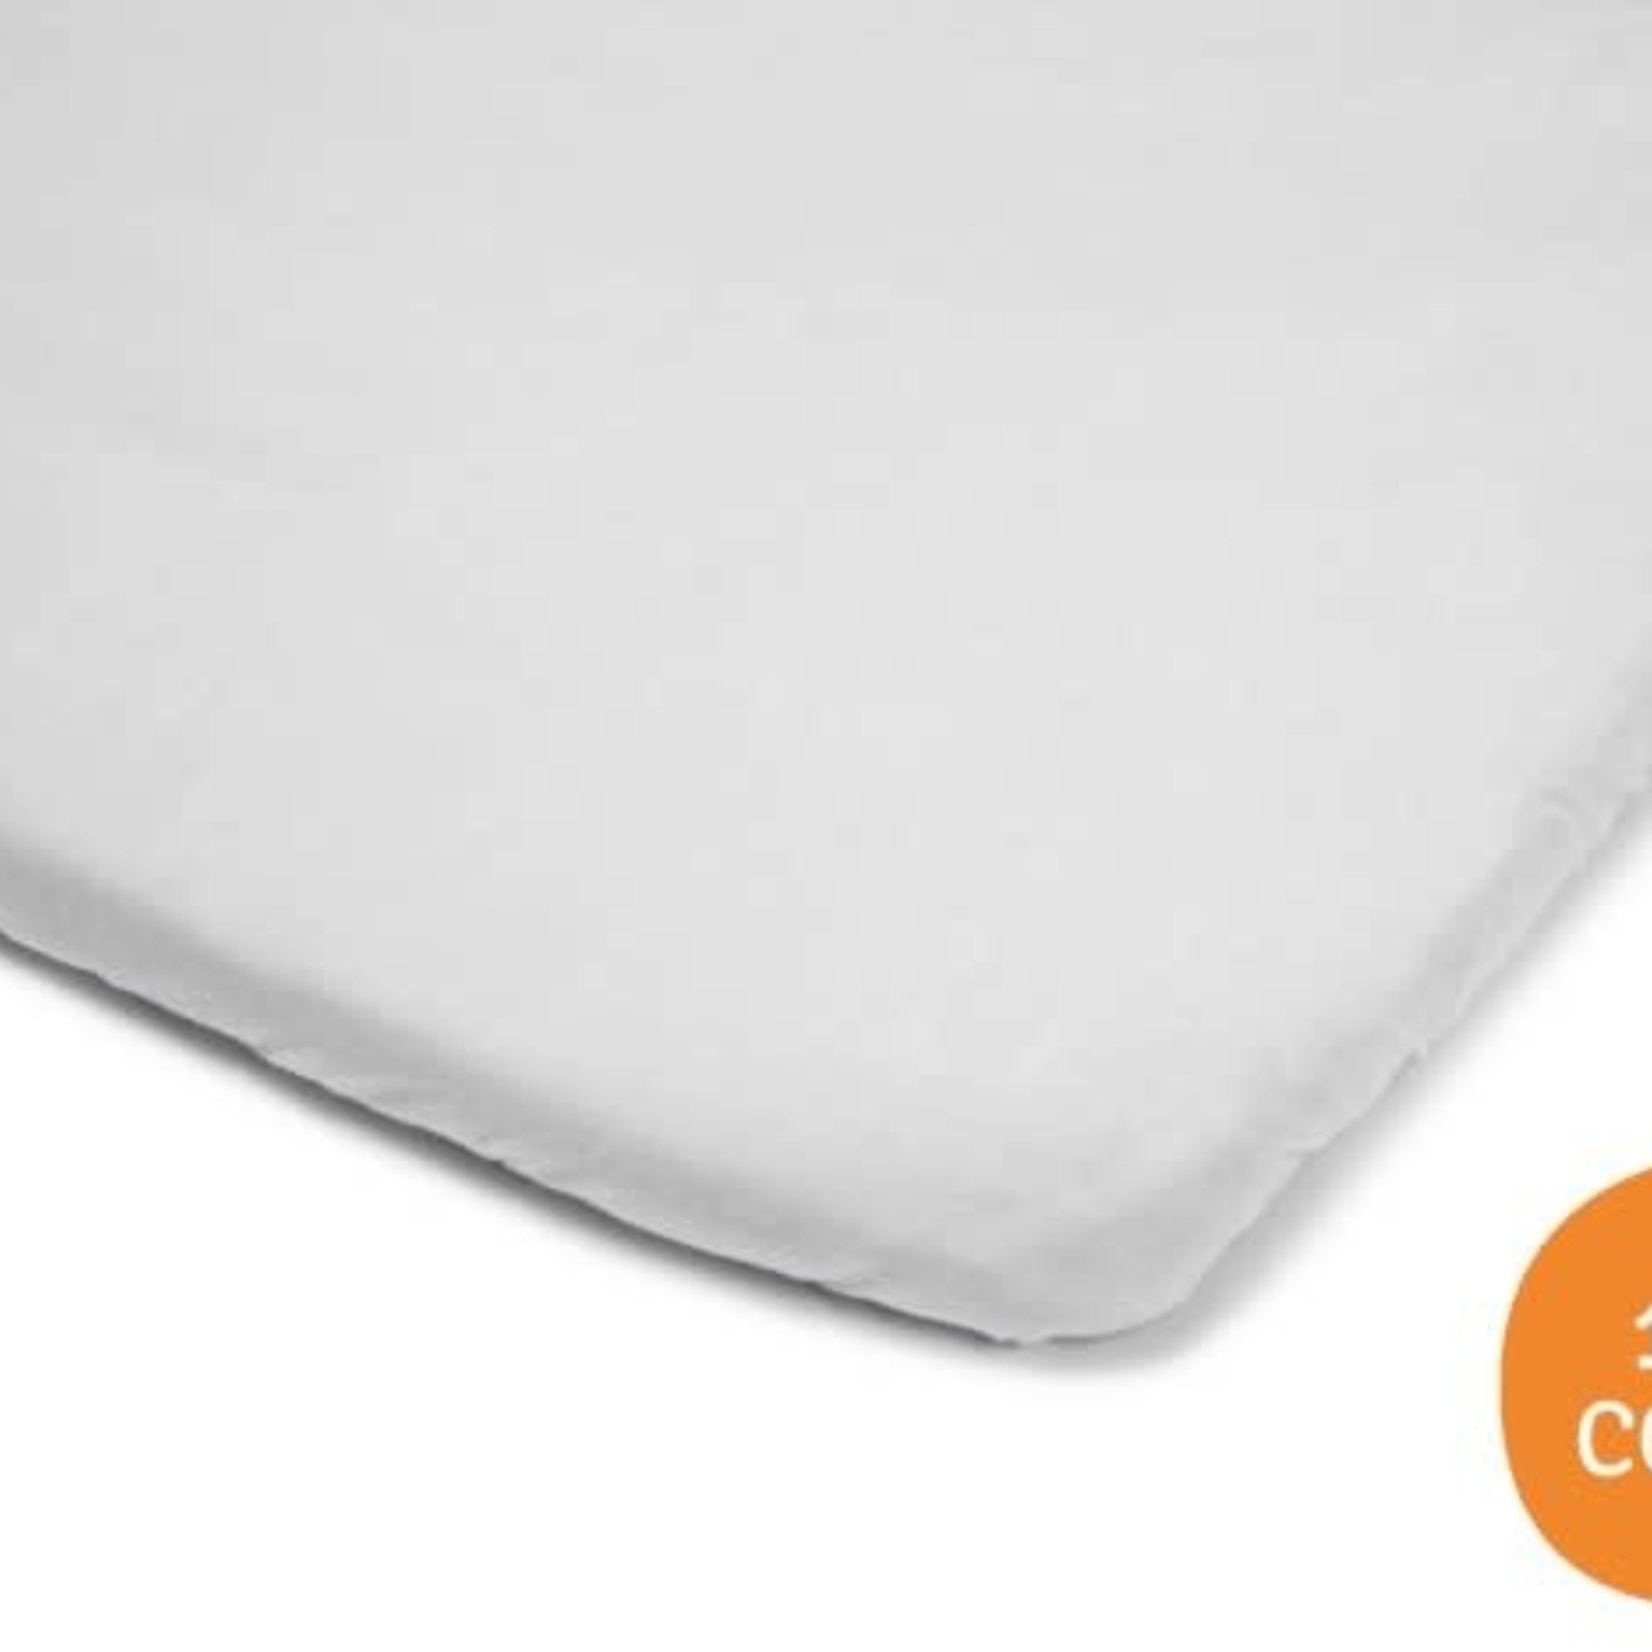 AeroMoov Instant travel cot - Fitted sheet